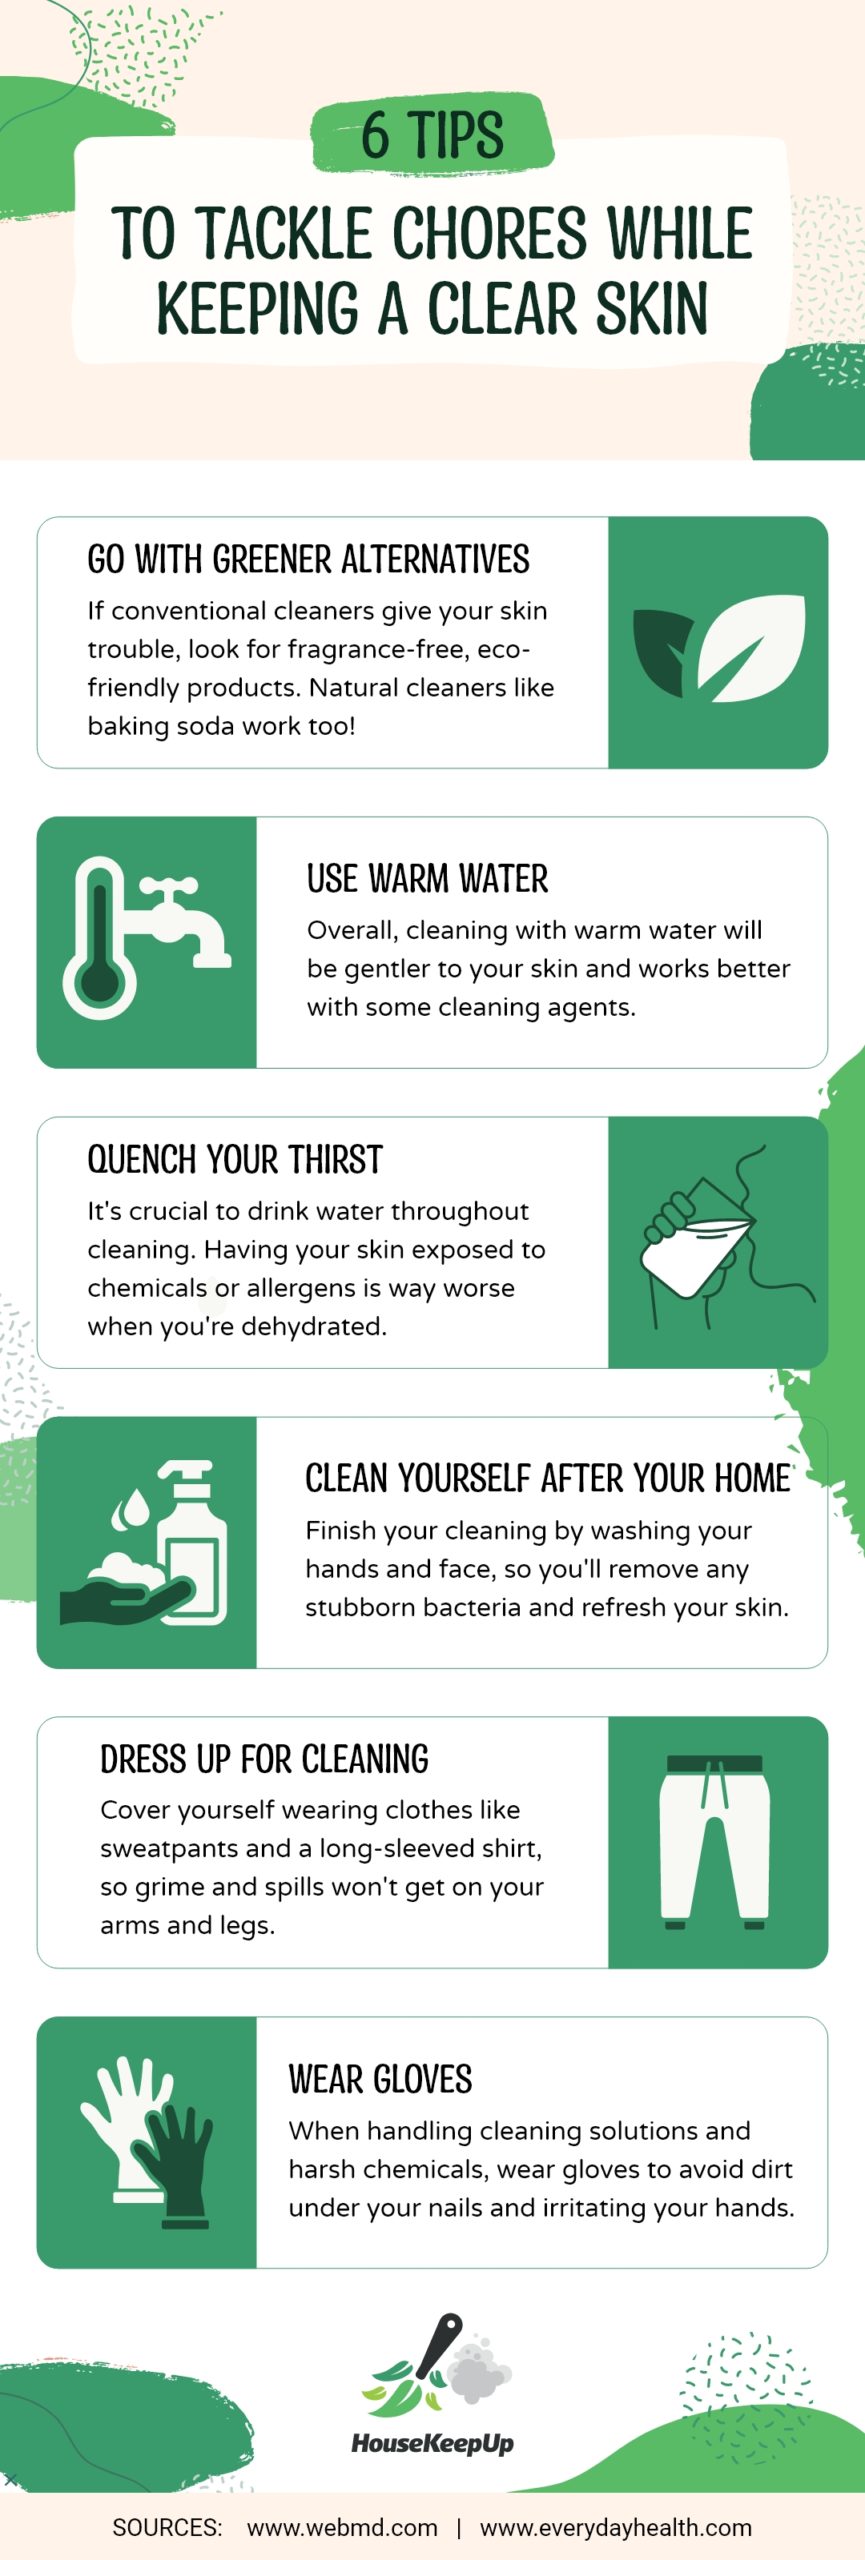 I'm a cleaning pro, my three tips make these annoying chores a